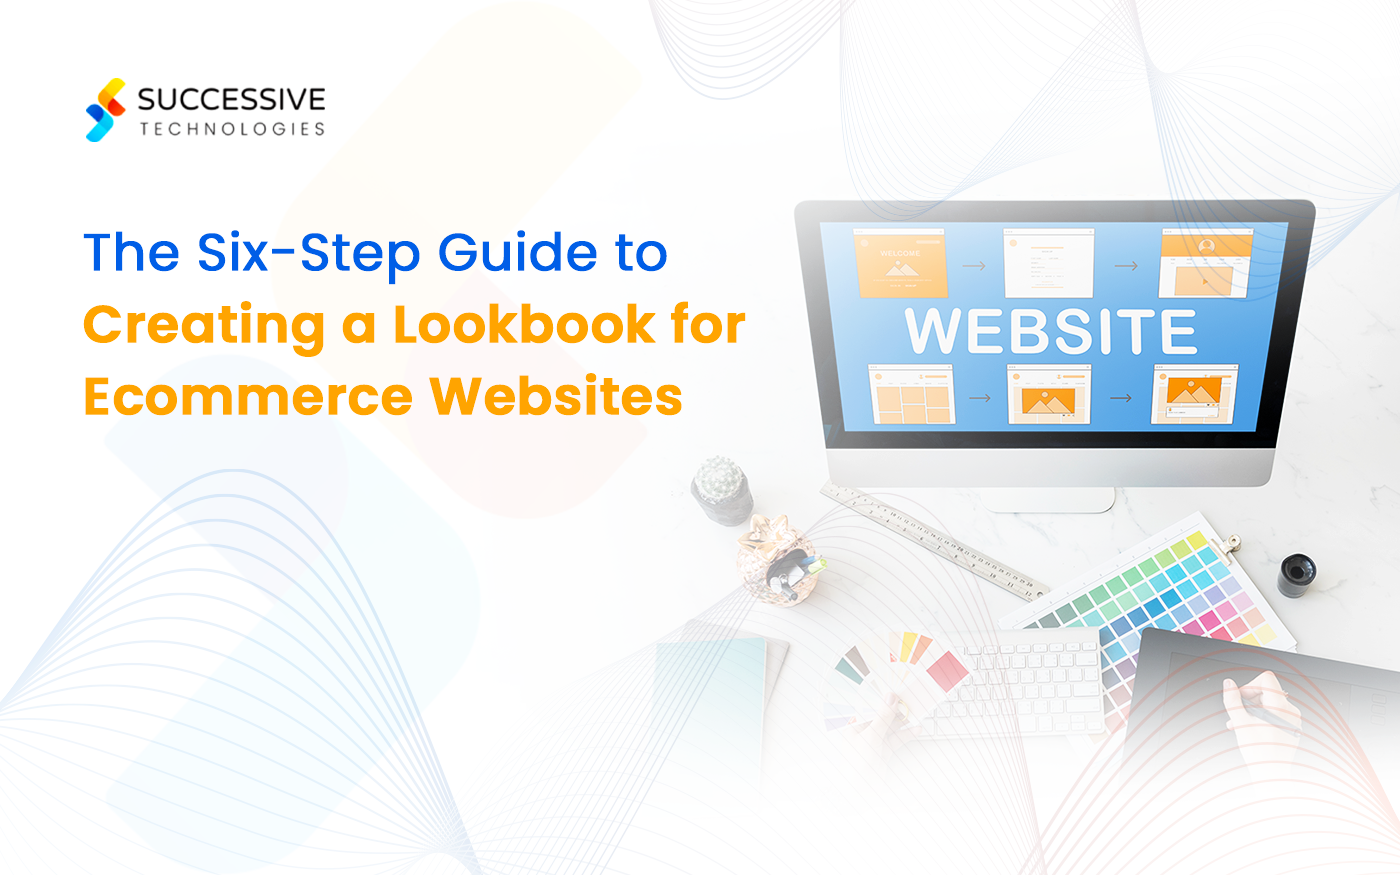 The Six-Step Guide to Creating a Lookbook for Ecommerce Websites